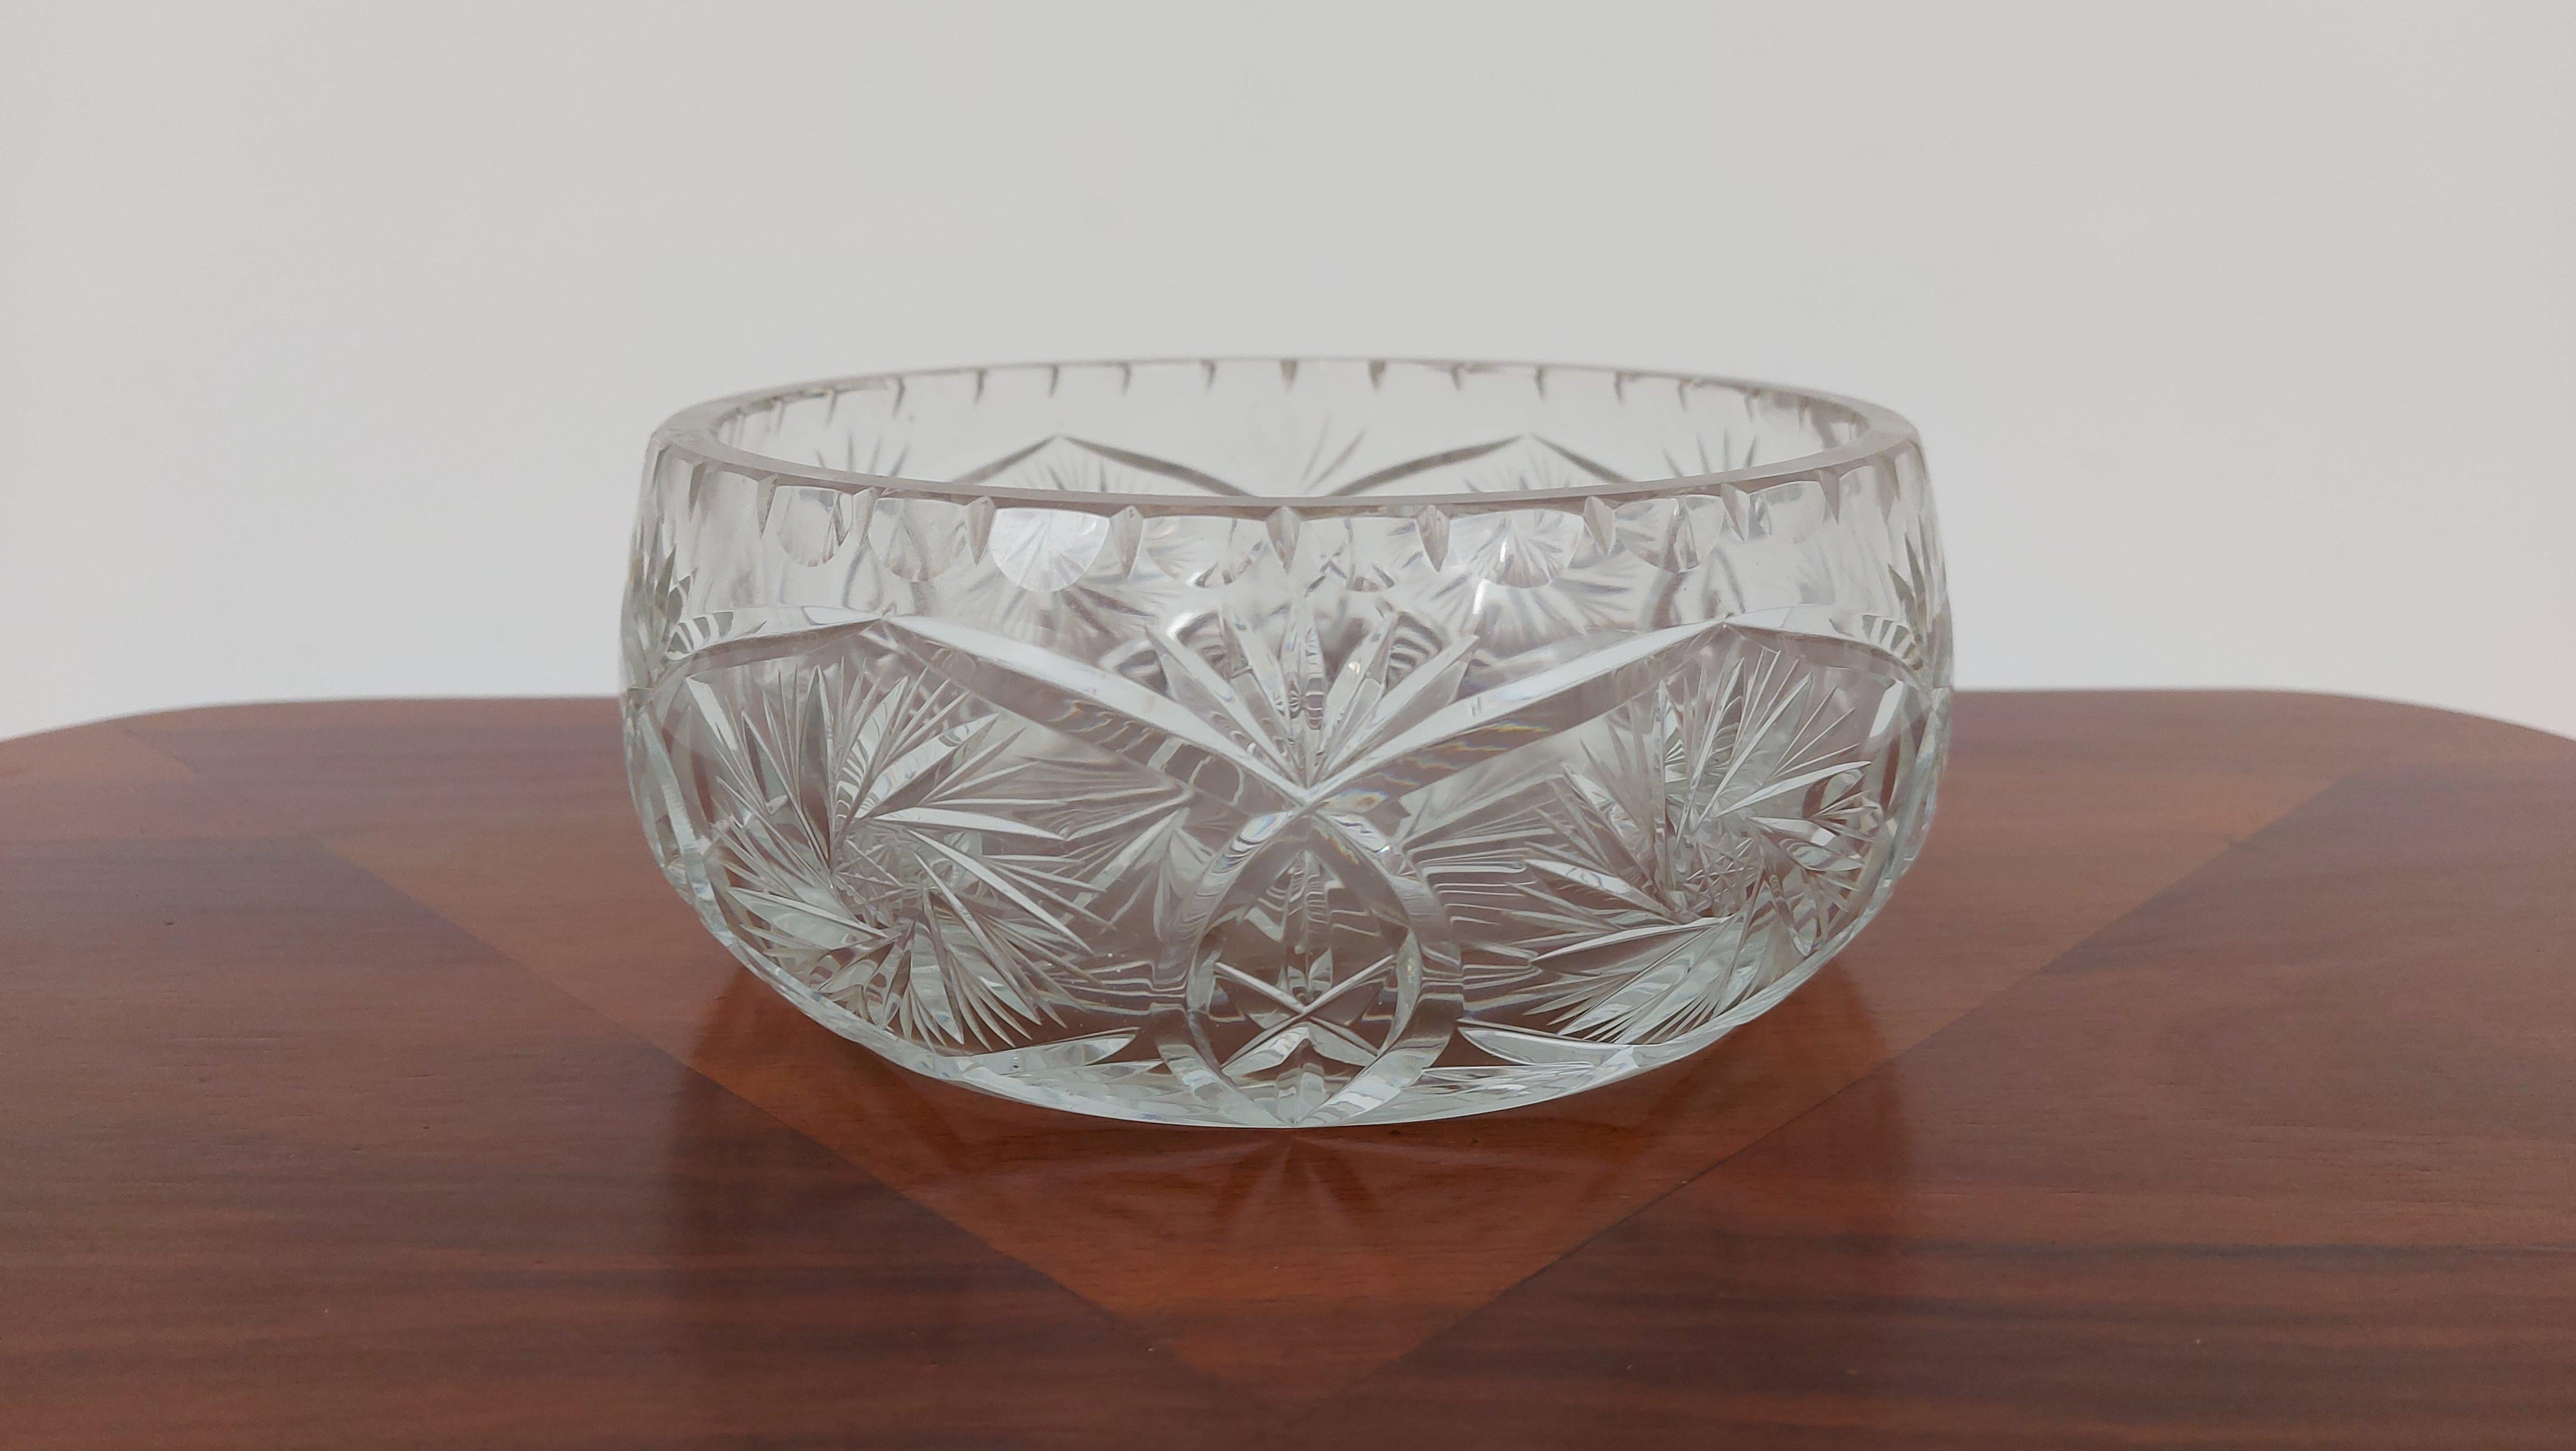 Crystal bowl for fruit or sweets.

Made in Poland in the 1950s / 1960s.

Very good condition.

Dimensions: height 8 cm / diameter 20 cm.